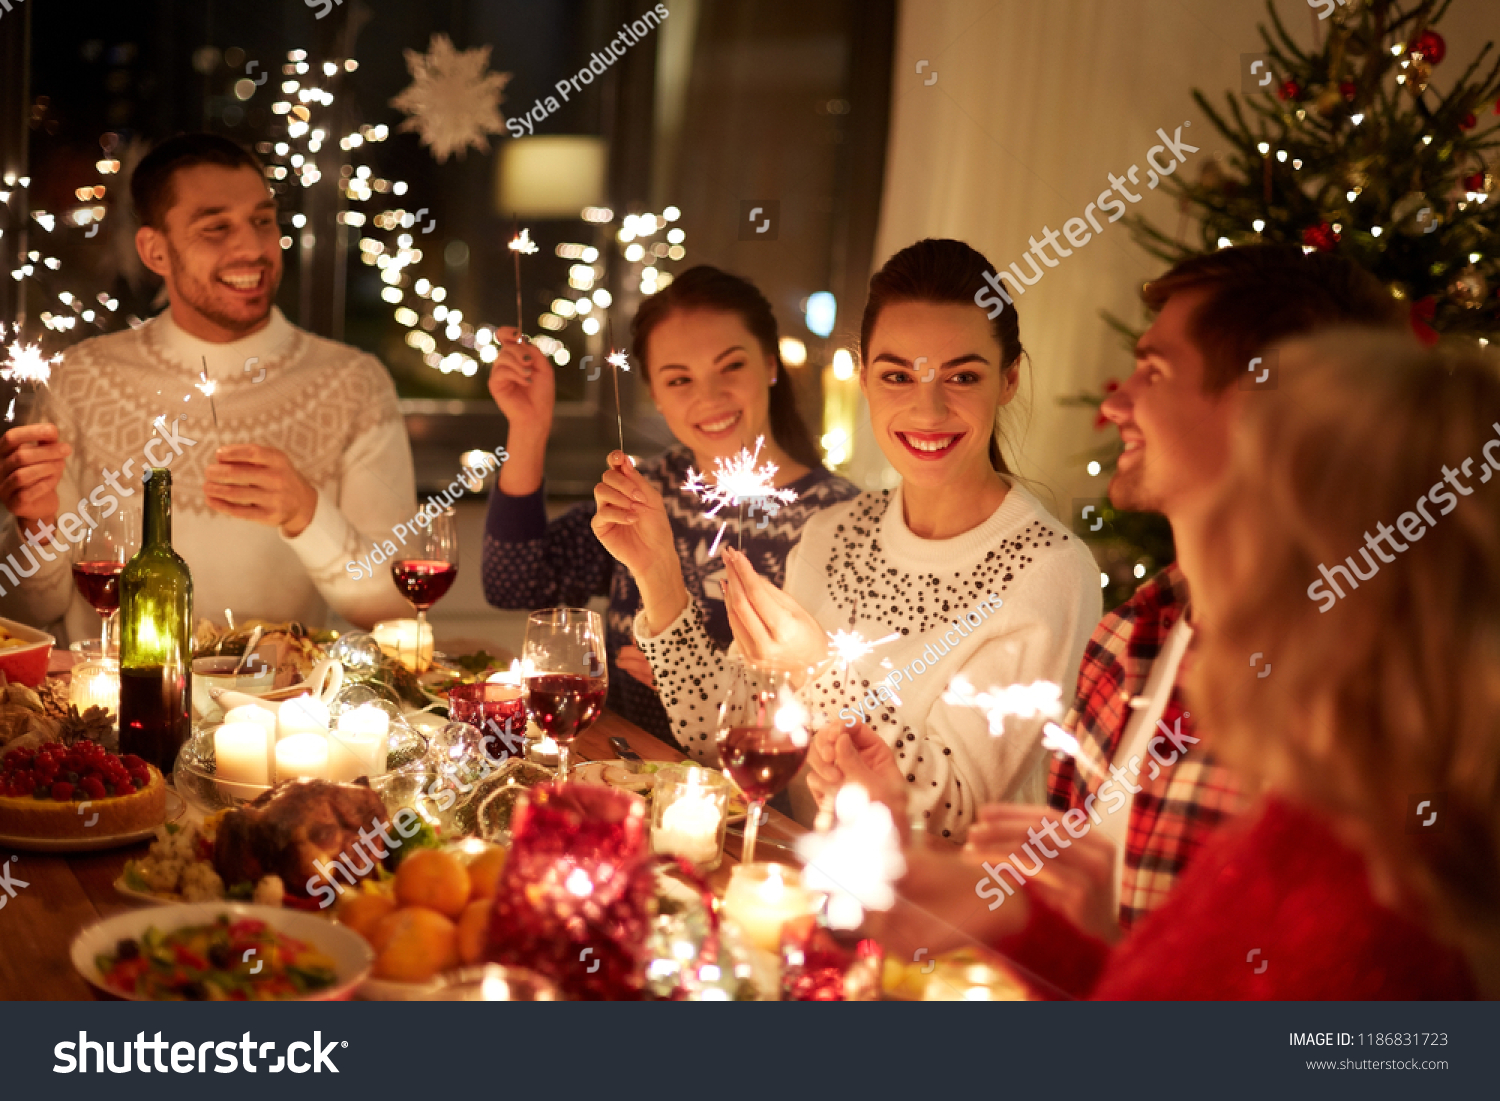 winter holidays and people concept - happy friends with sparklers celebrating christmas at home feast #1186831723